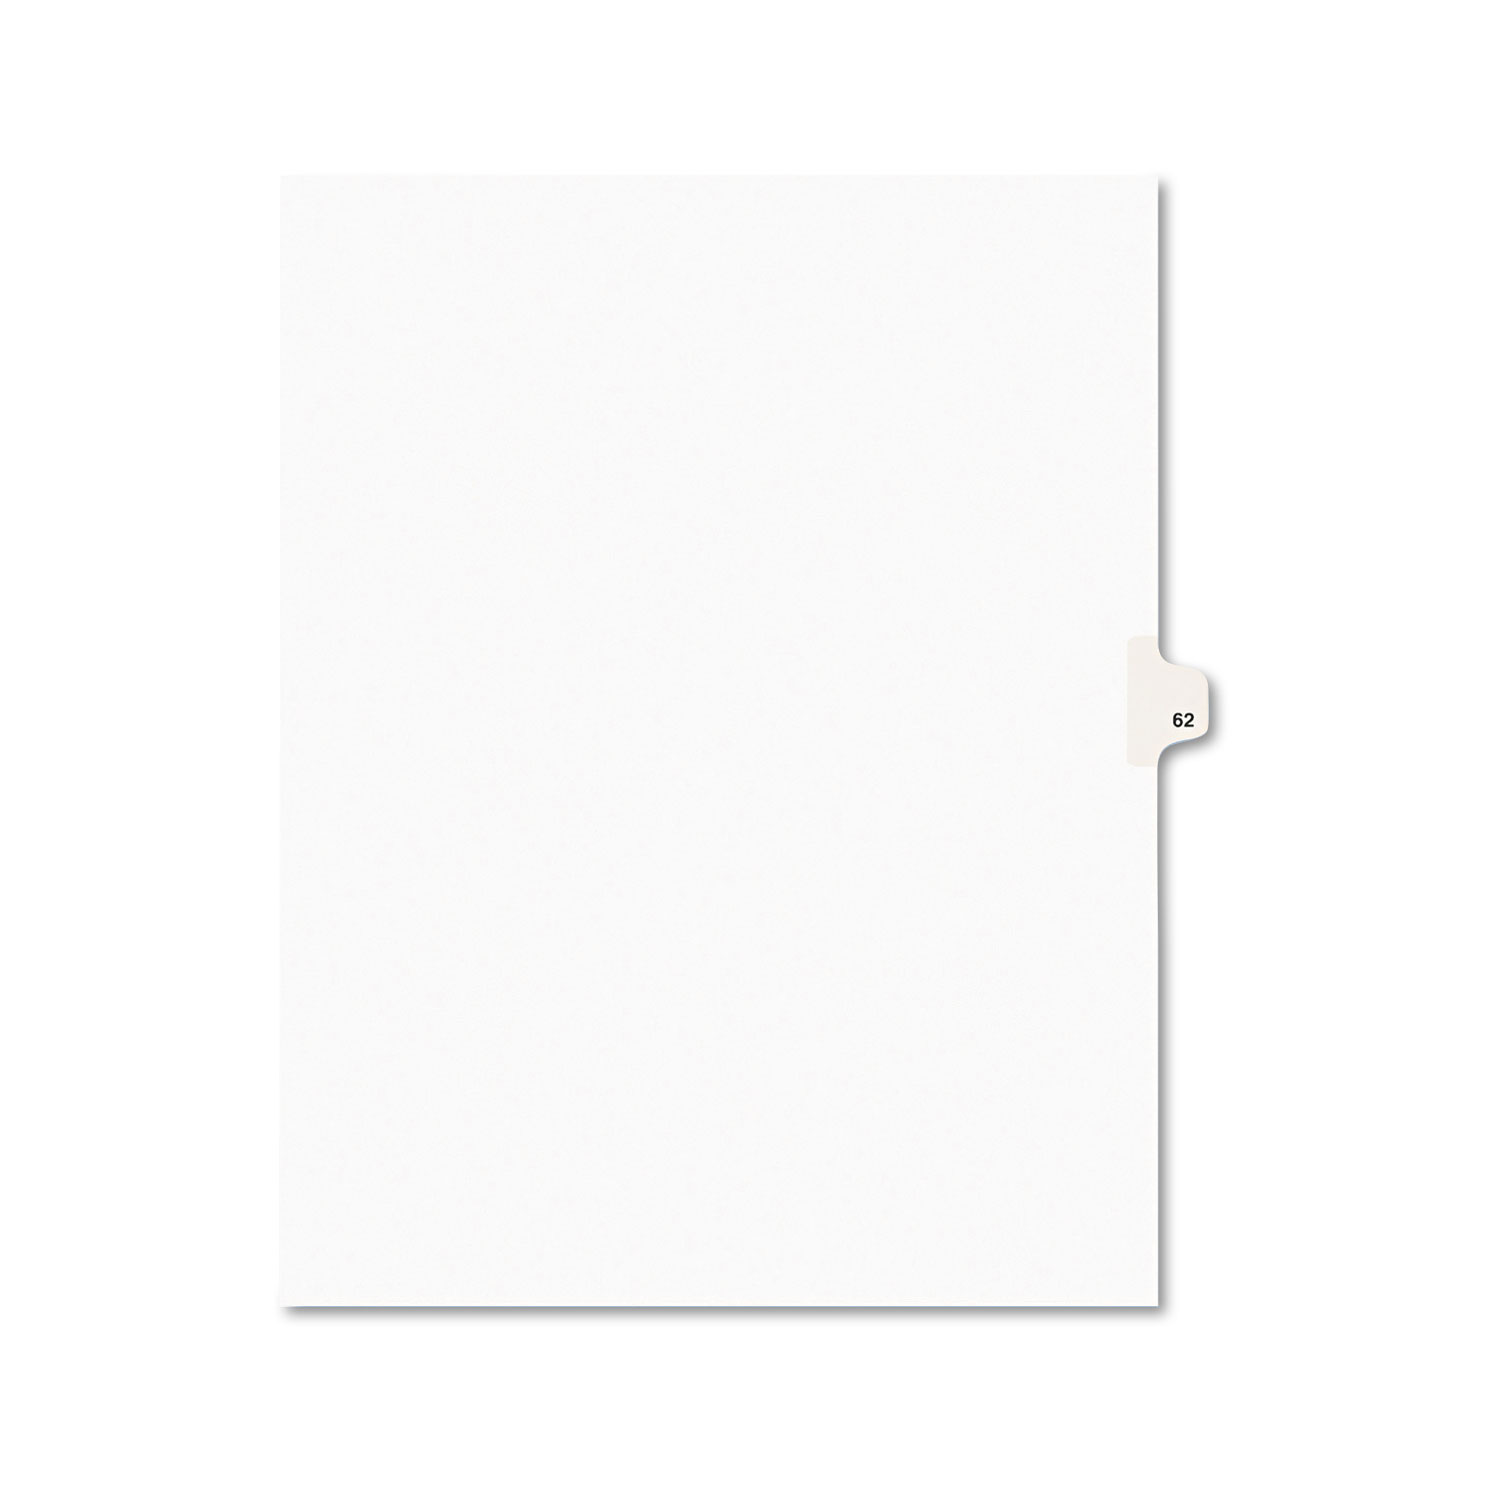  Avery 01062 Preprinted Legal Exhibit Side Tab Index Dividers, Avery Style, 10-Tab, 62, 11 x 8.5, White, 25/Pack (AVE01062) 